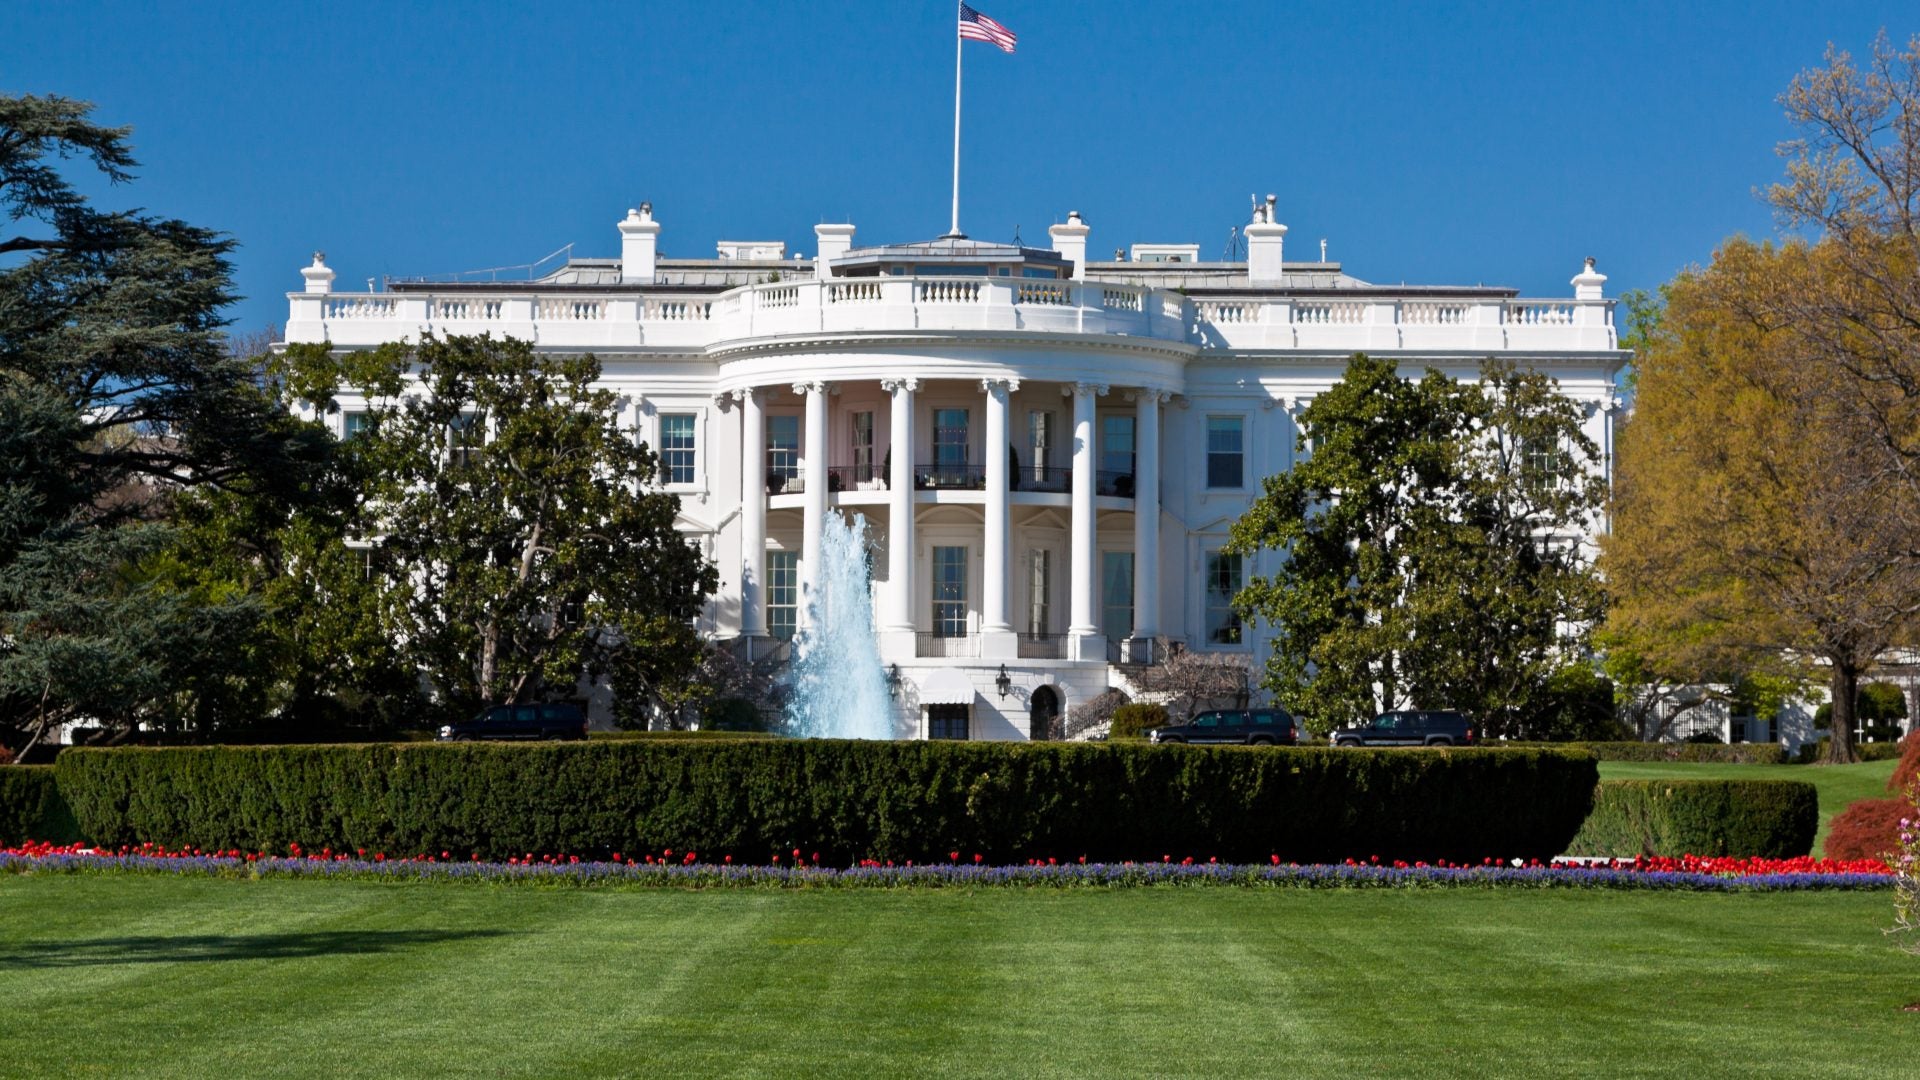 Secret Service Launches Investigation After Cocaine Found At The White House